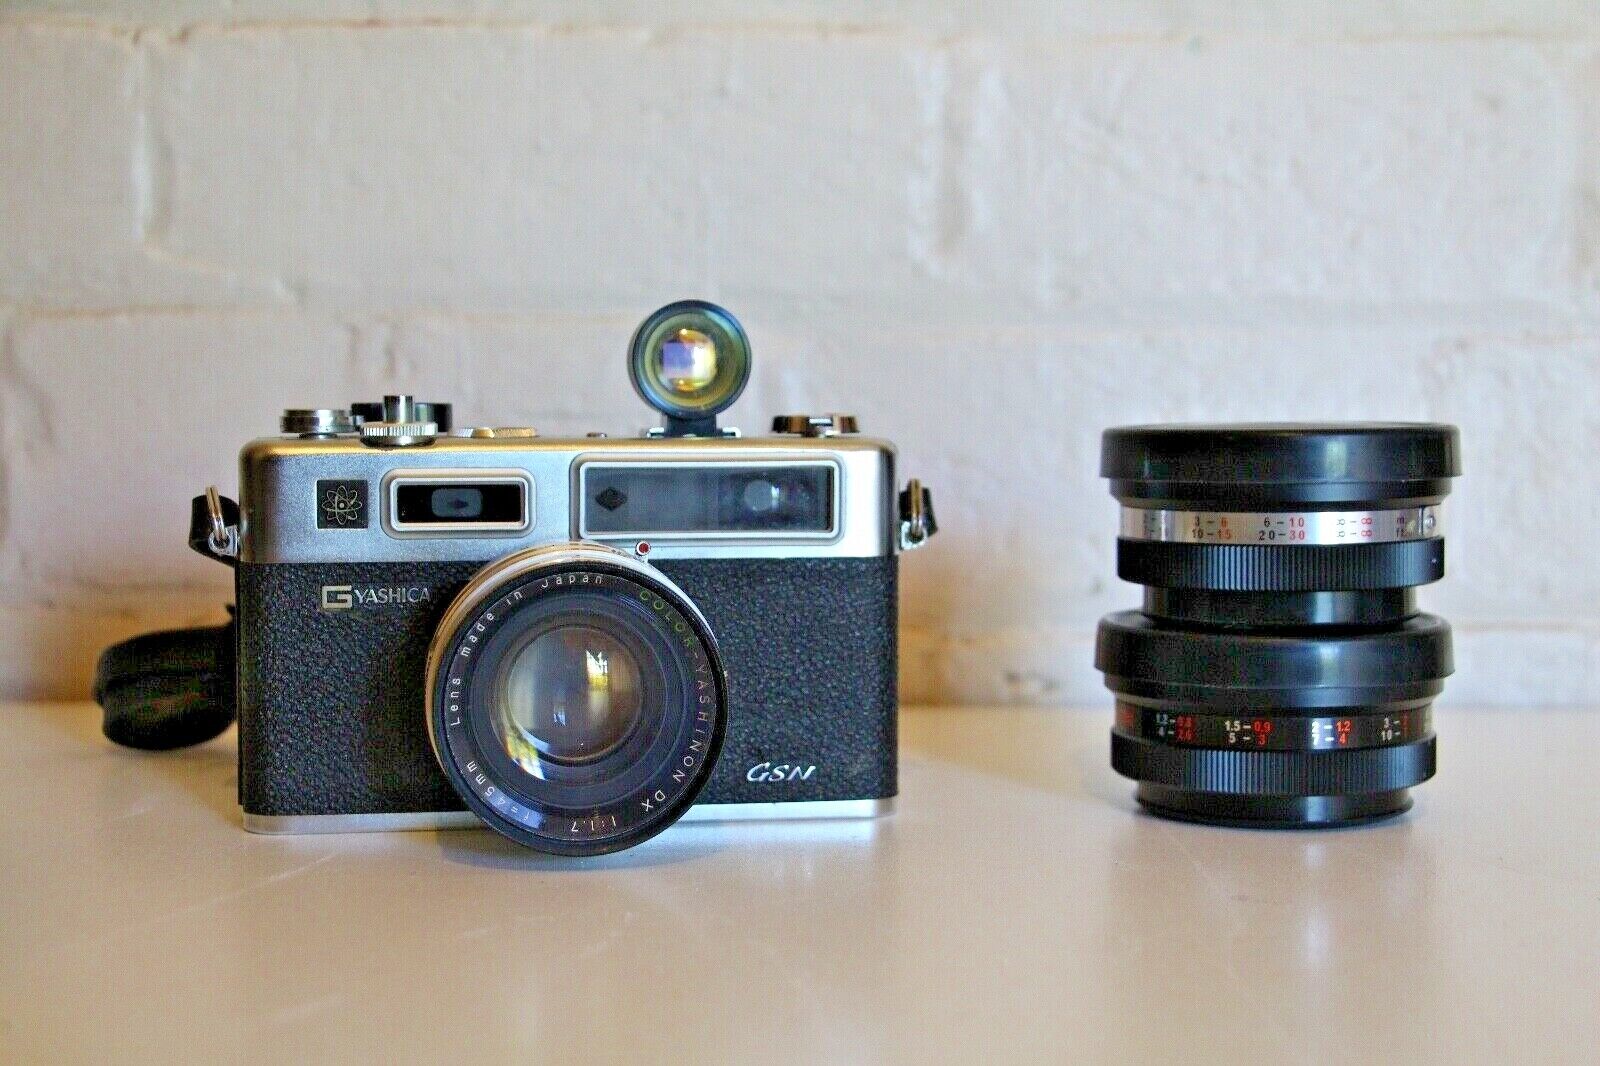 YESHIVA GSN 35mm Film Camera + 2 Wide Angles Lenses + TELE-WIDE Finder + Cases